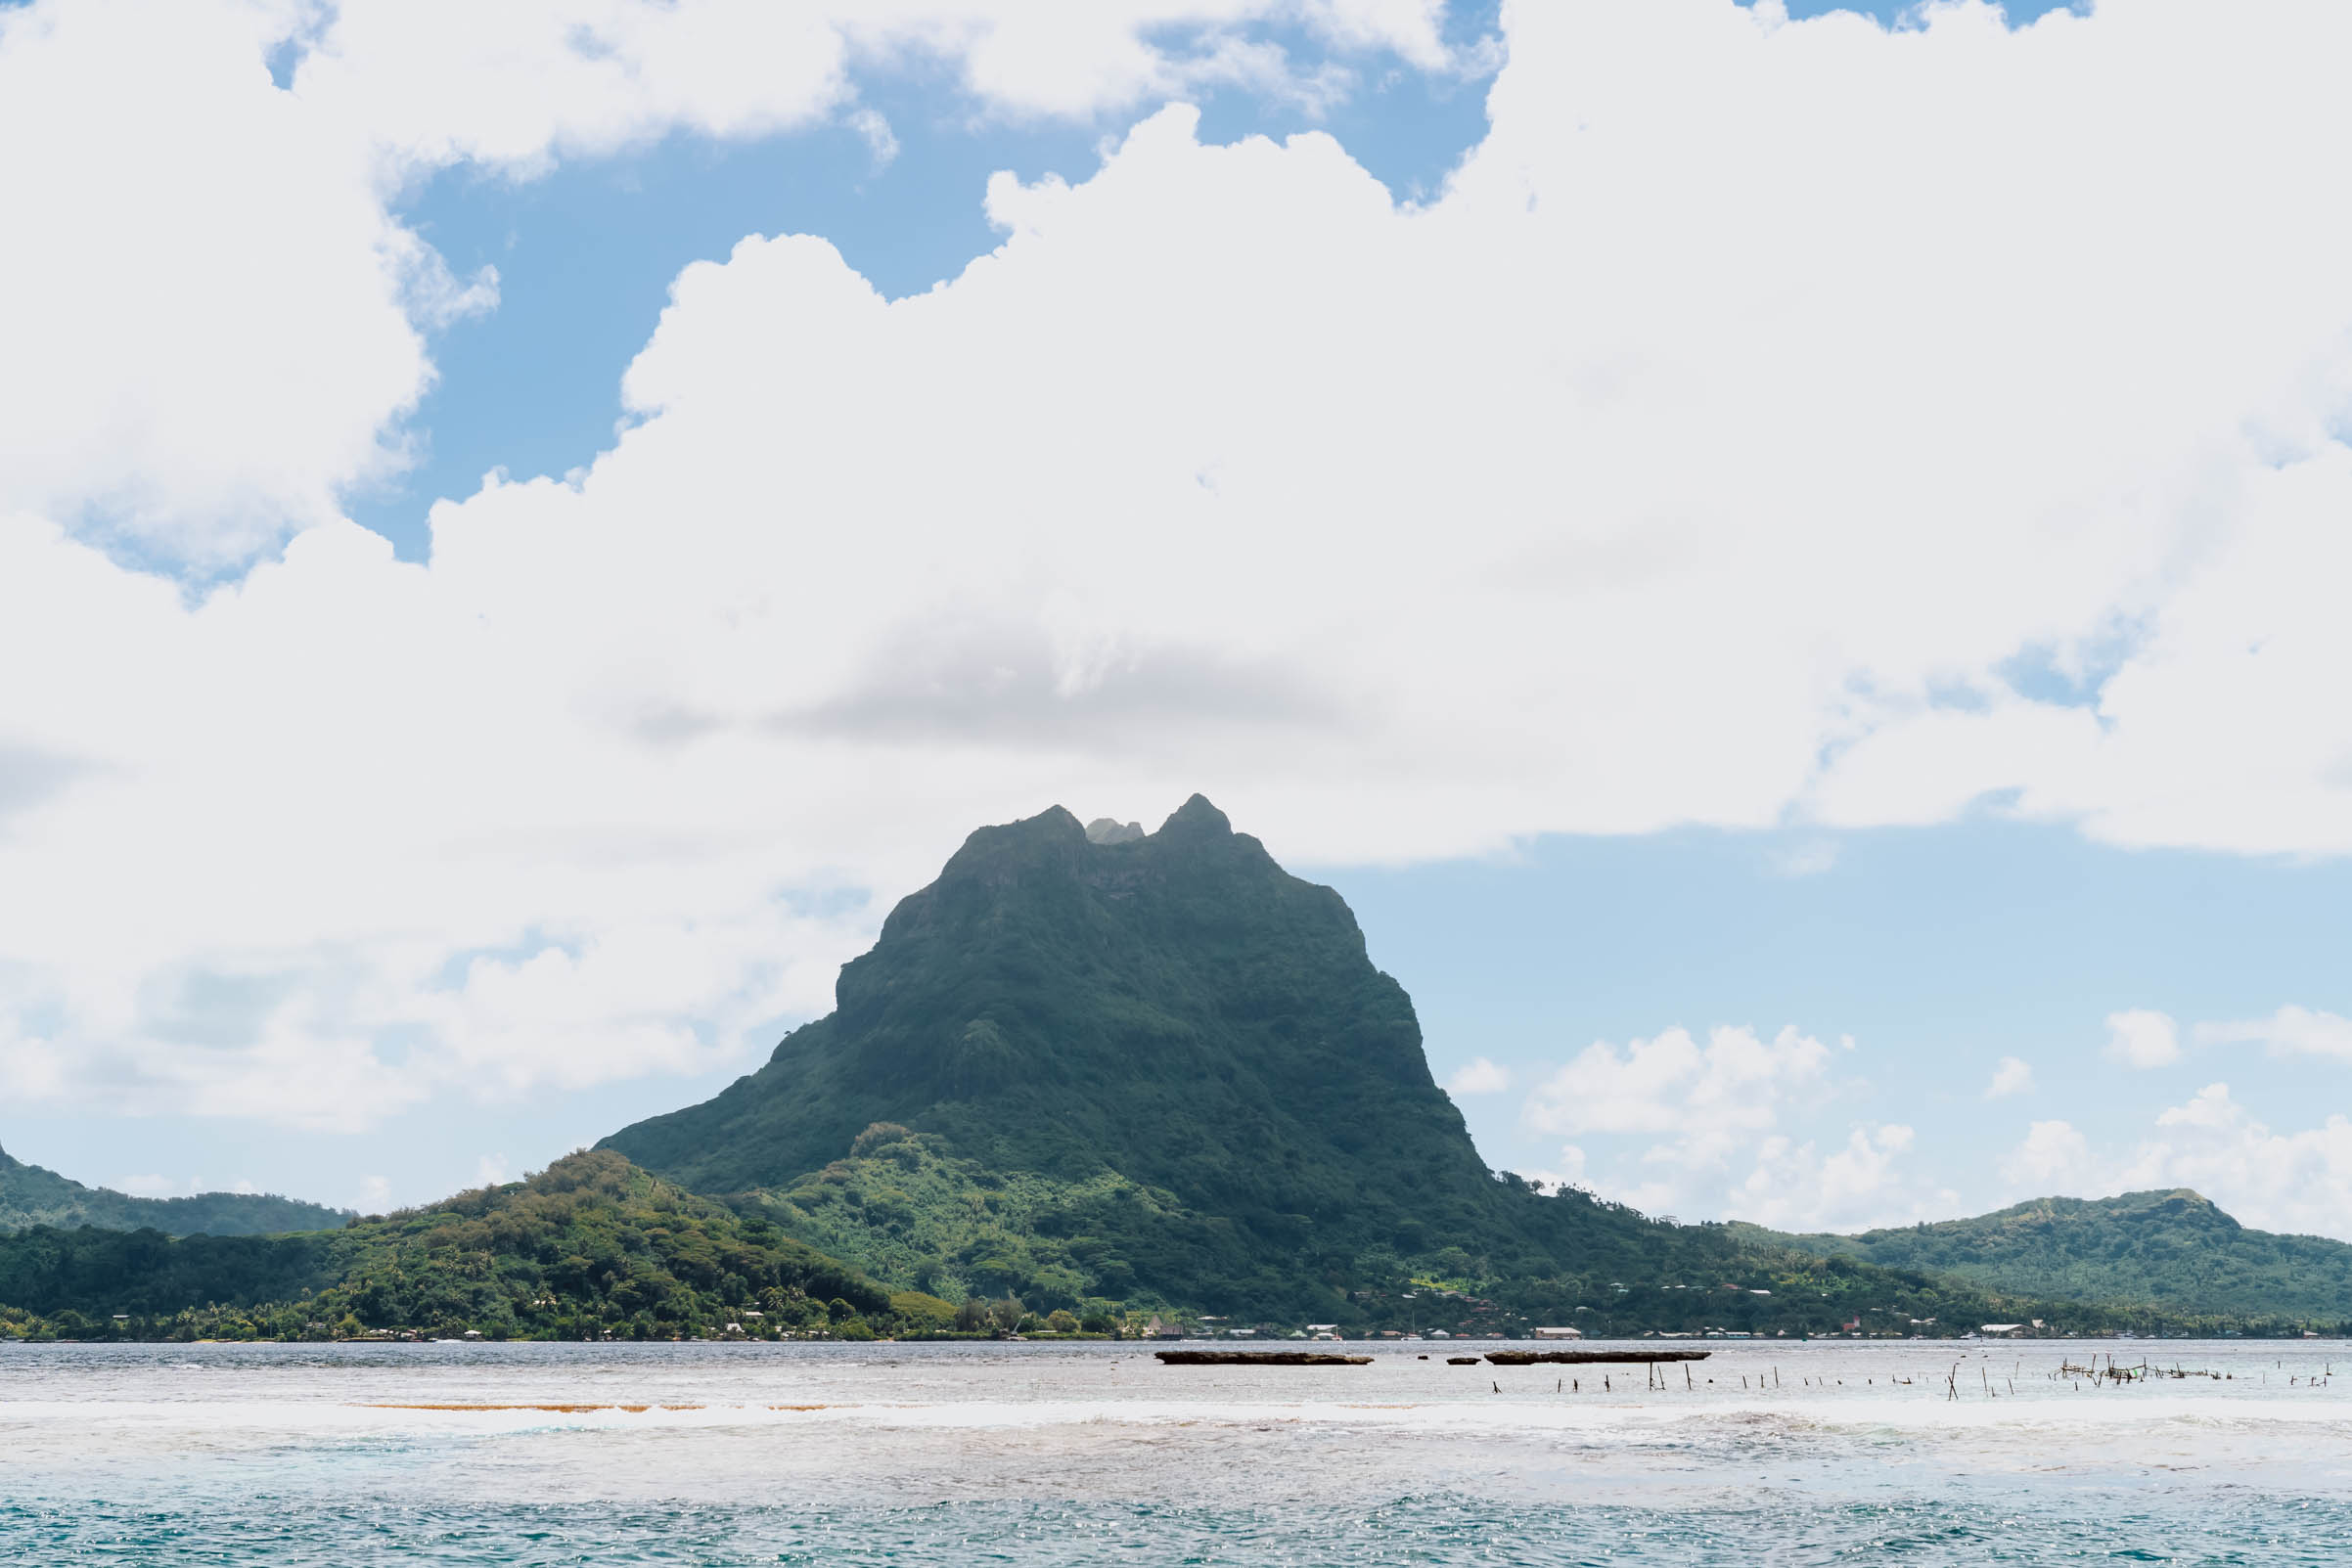 Otemanu mount in Bora Bora from a distance